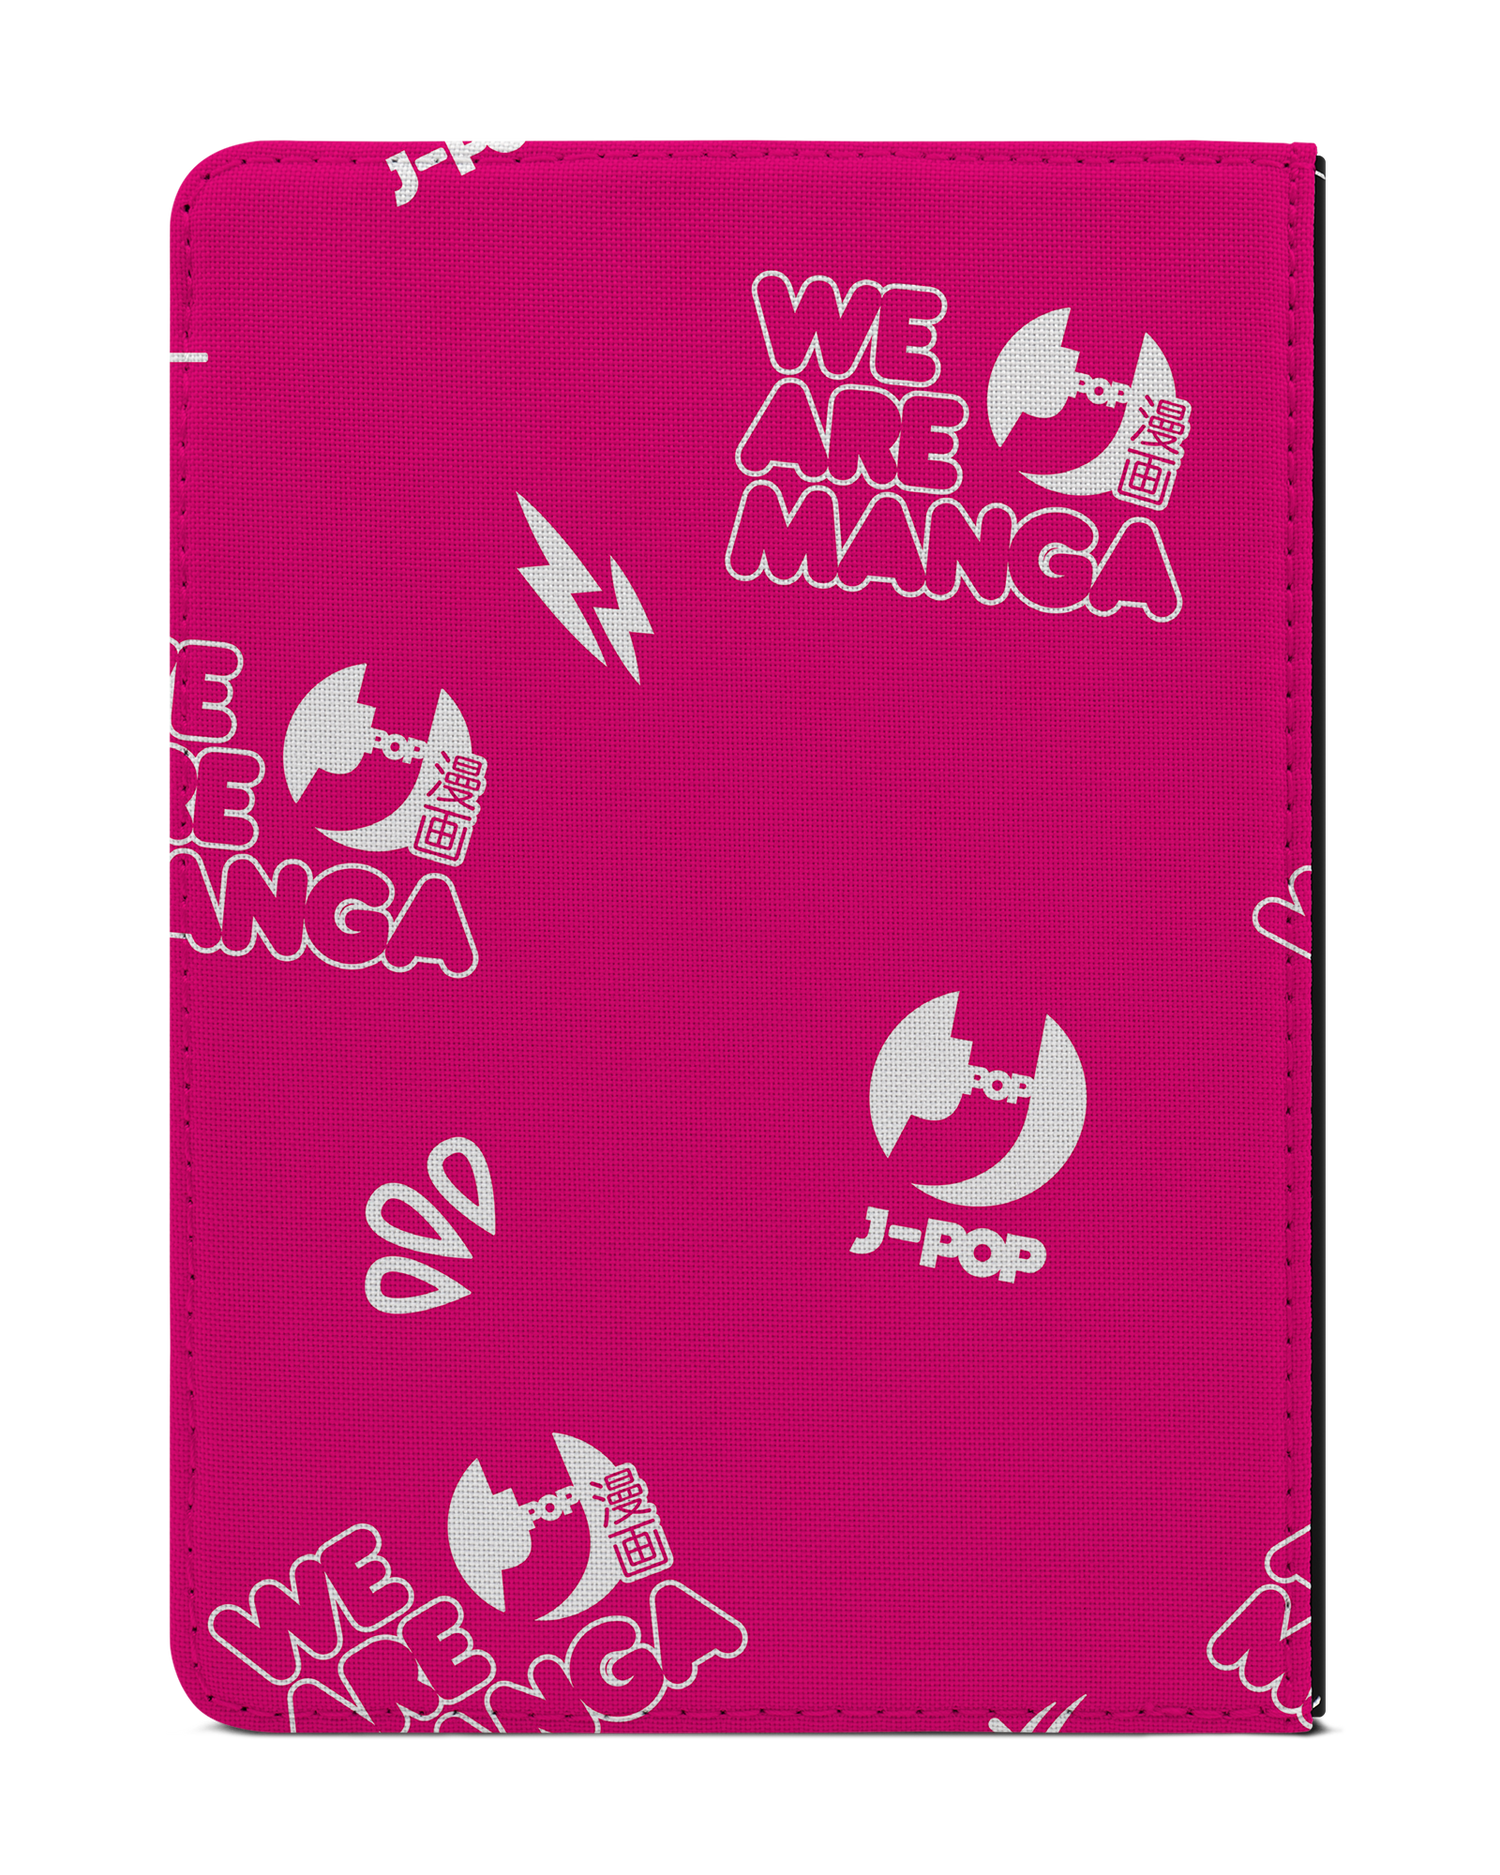 #WeAreManga eReader Case for tolino vision 1 to 4 HD: Back View